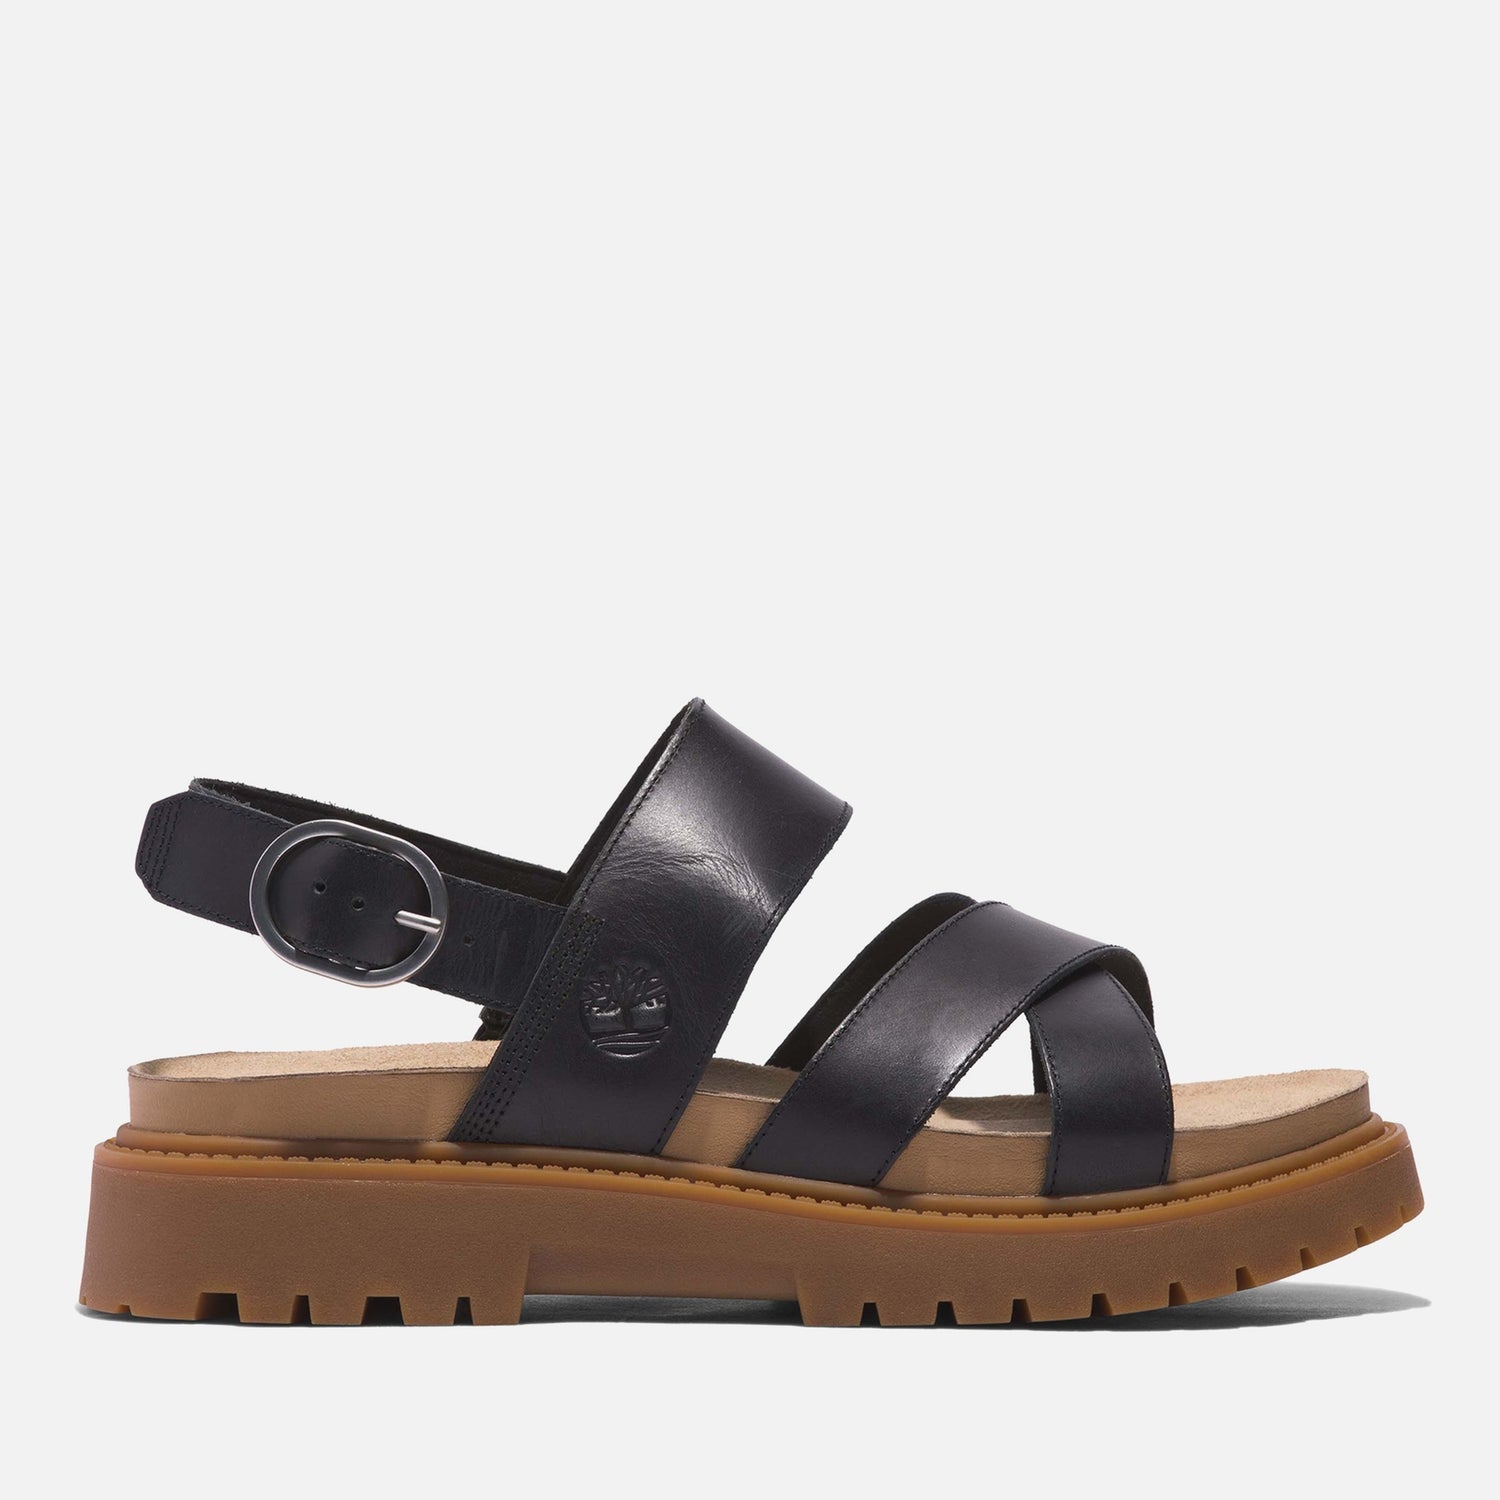 Timberland Women's Clairemont Way Leather Sandals - UK 3